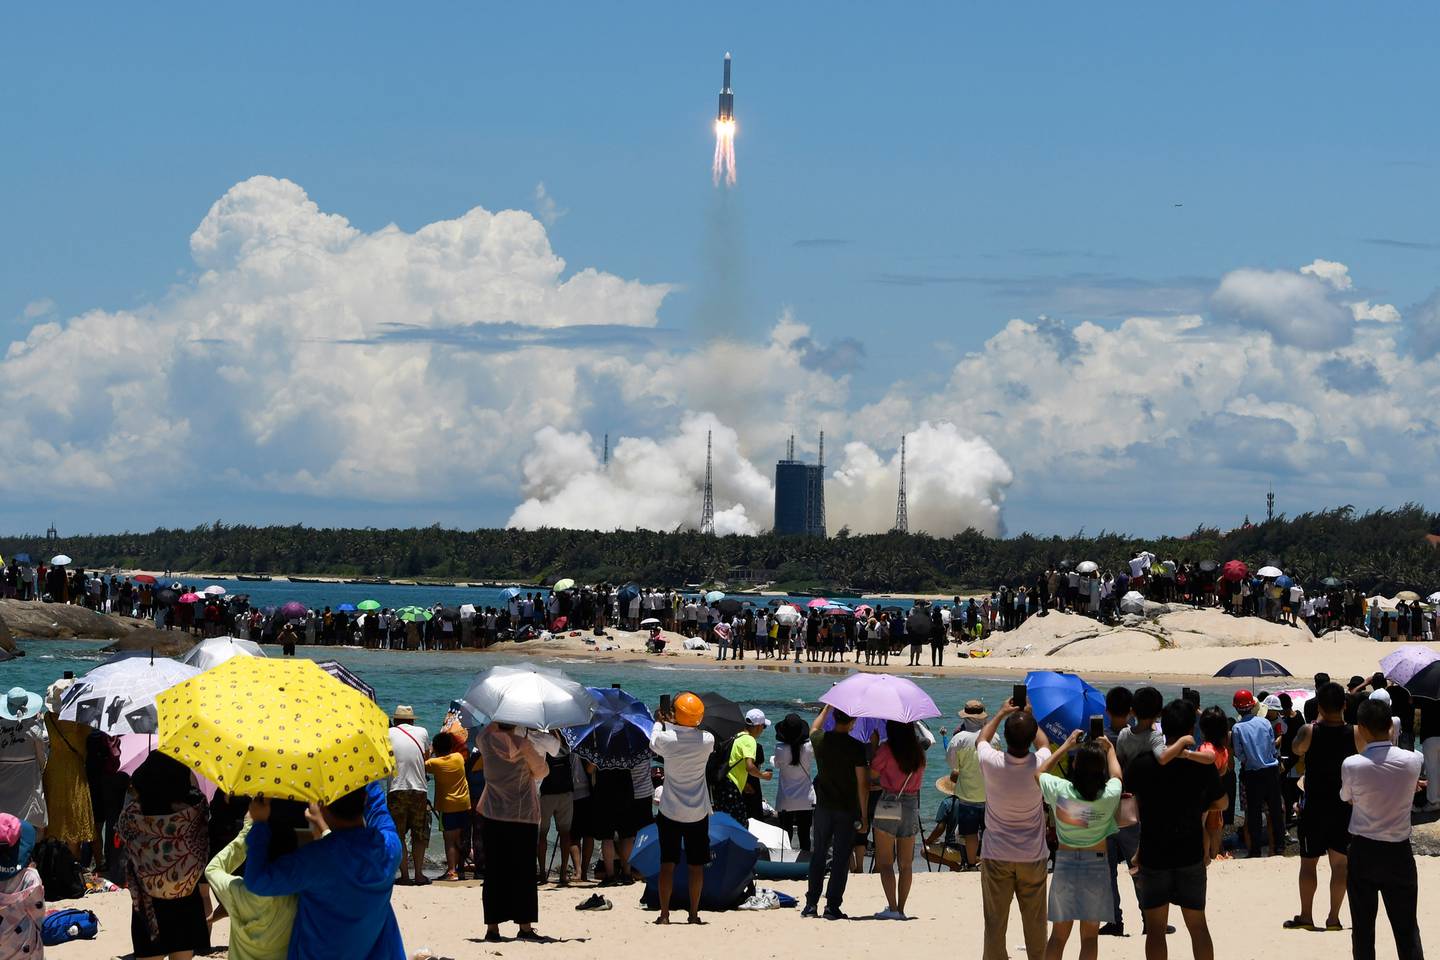 Spectators watch as a Long March-5 rocket carrying the Tianwen-1 Mars probe lifts off from the Wenchang Space Launch Center in southern China's Hainan Province. Photo /AP